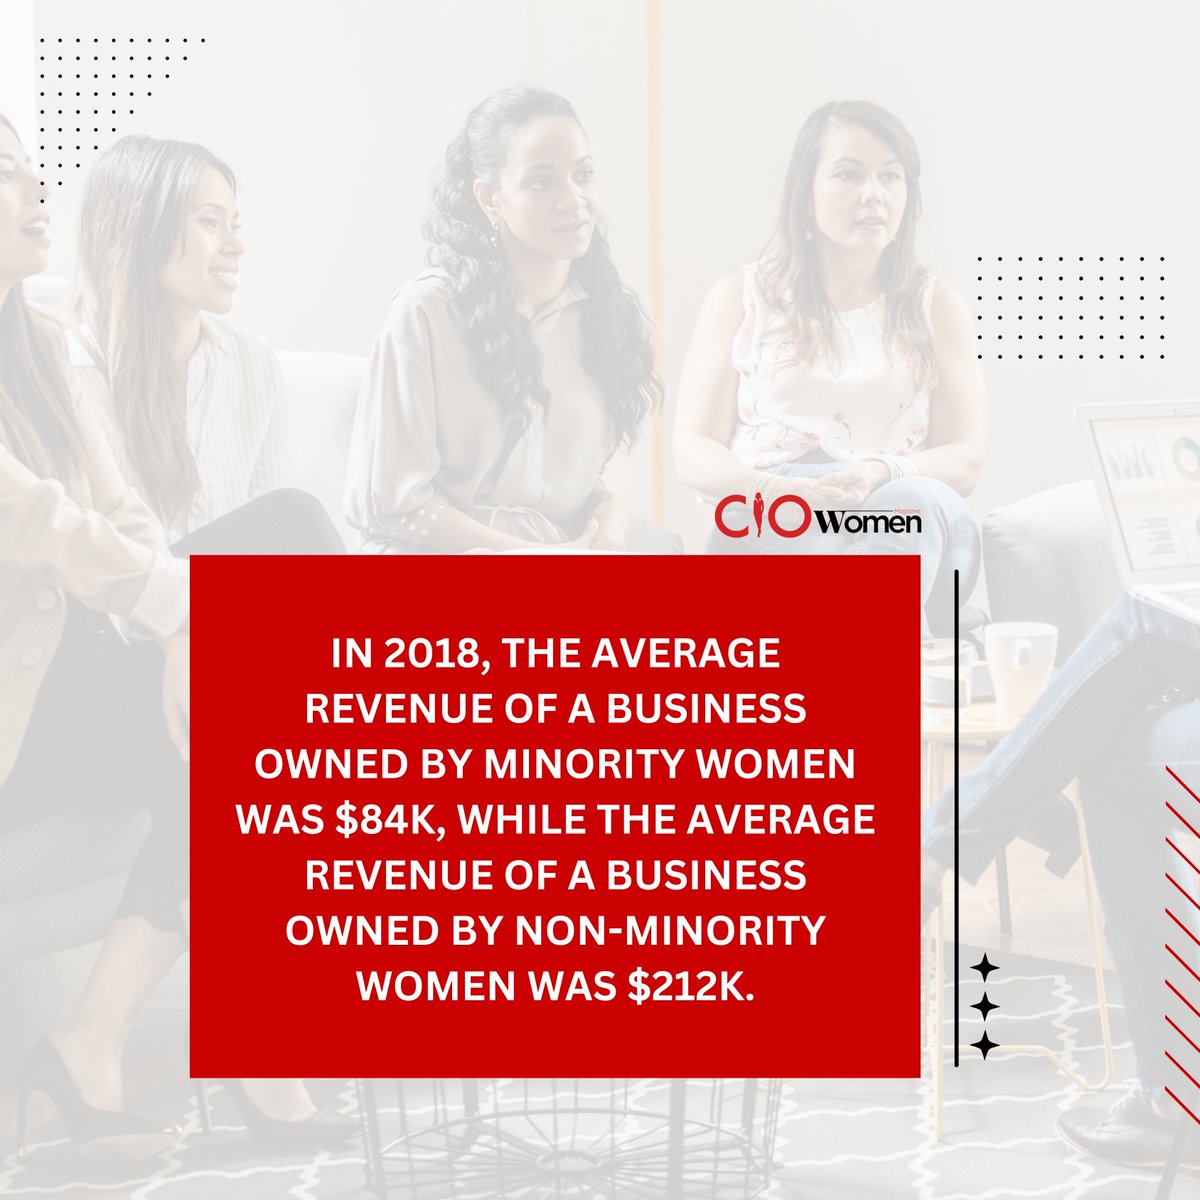 Minority women are taking giant strides in the business world, which is reflected through this statistic. 

#womeninbusiness #womenbusinesses #ciowomenmagazine #growth #femalesuccess